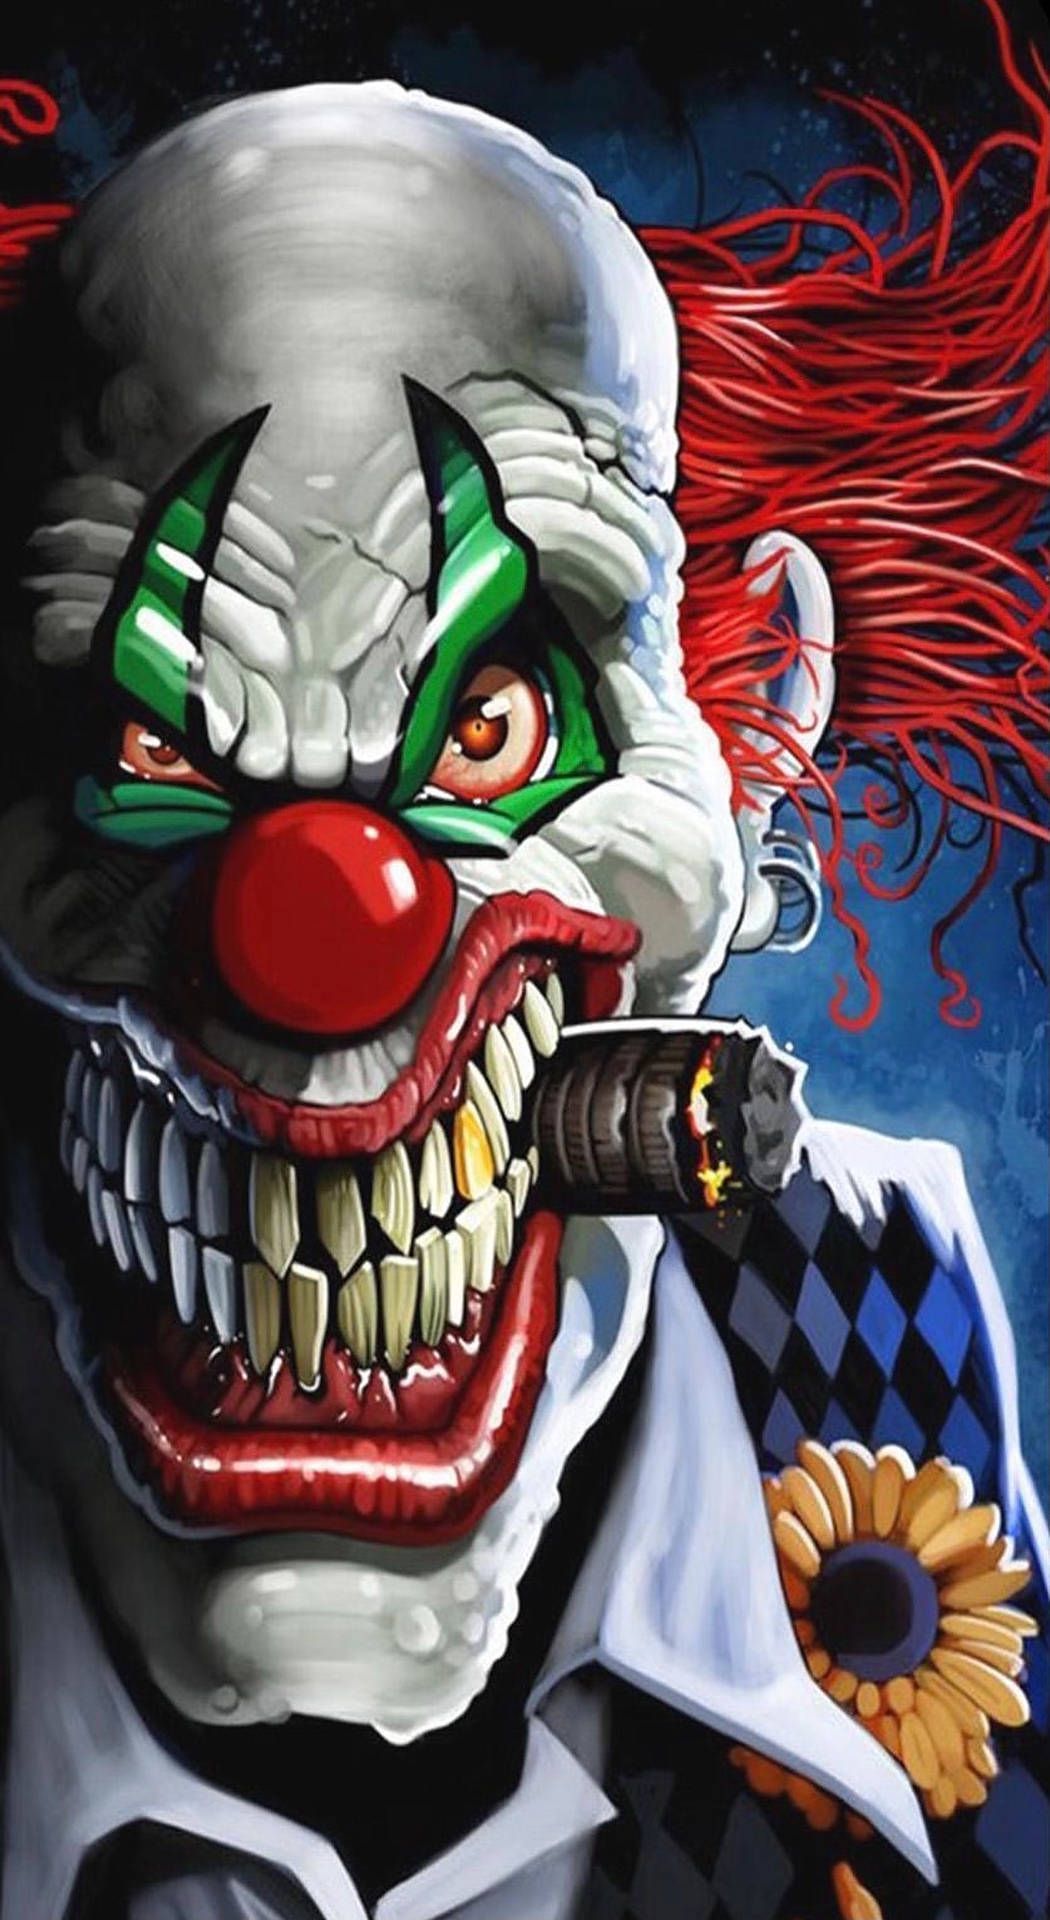 A clown with green eyes and red hair smoking - Clown